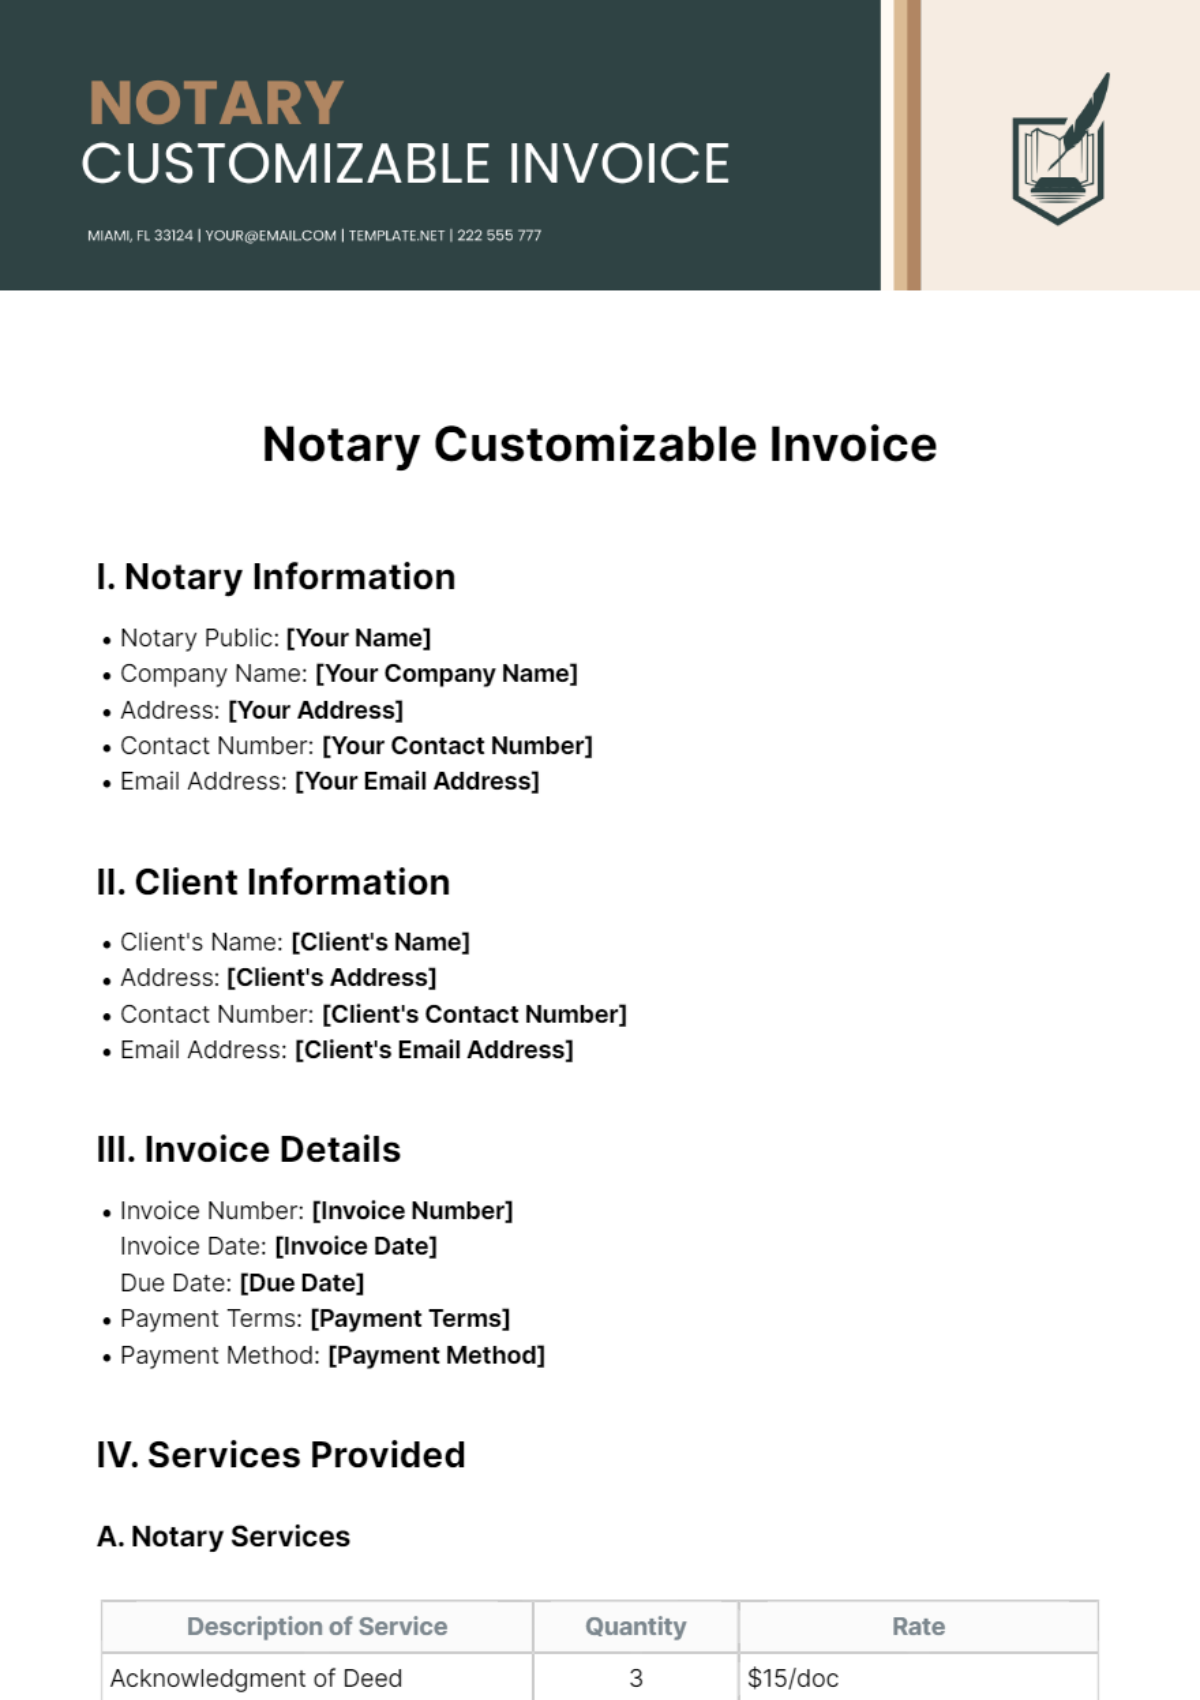 Free Notary Customizable Invoice Template